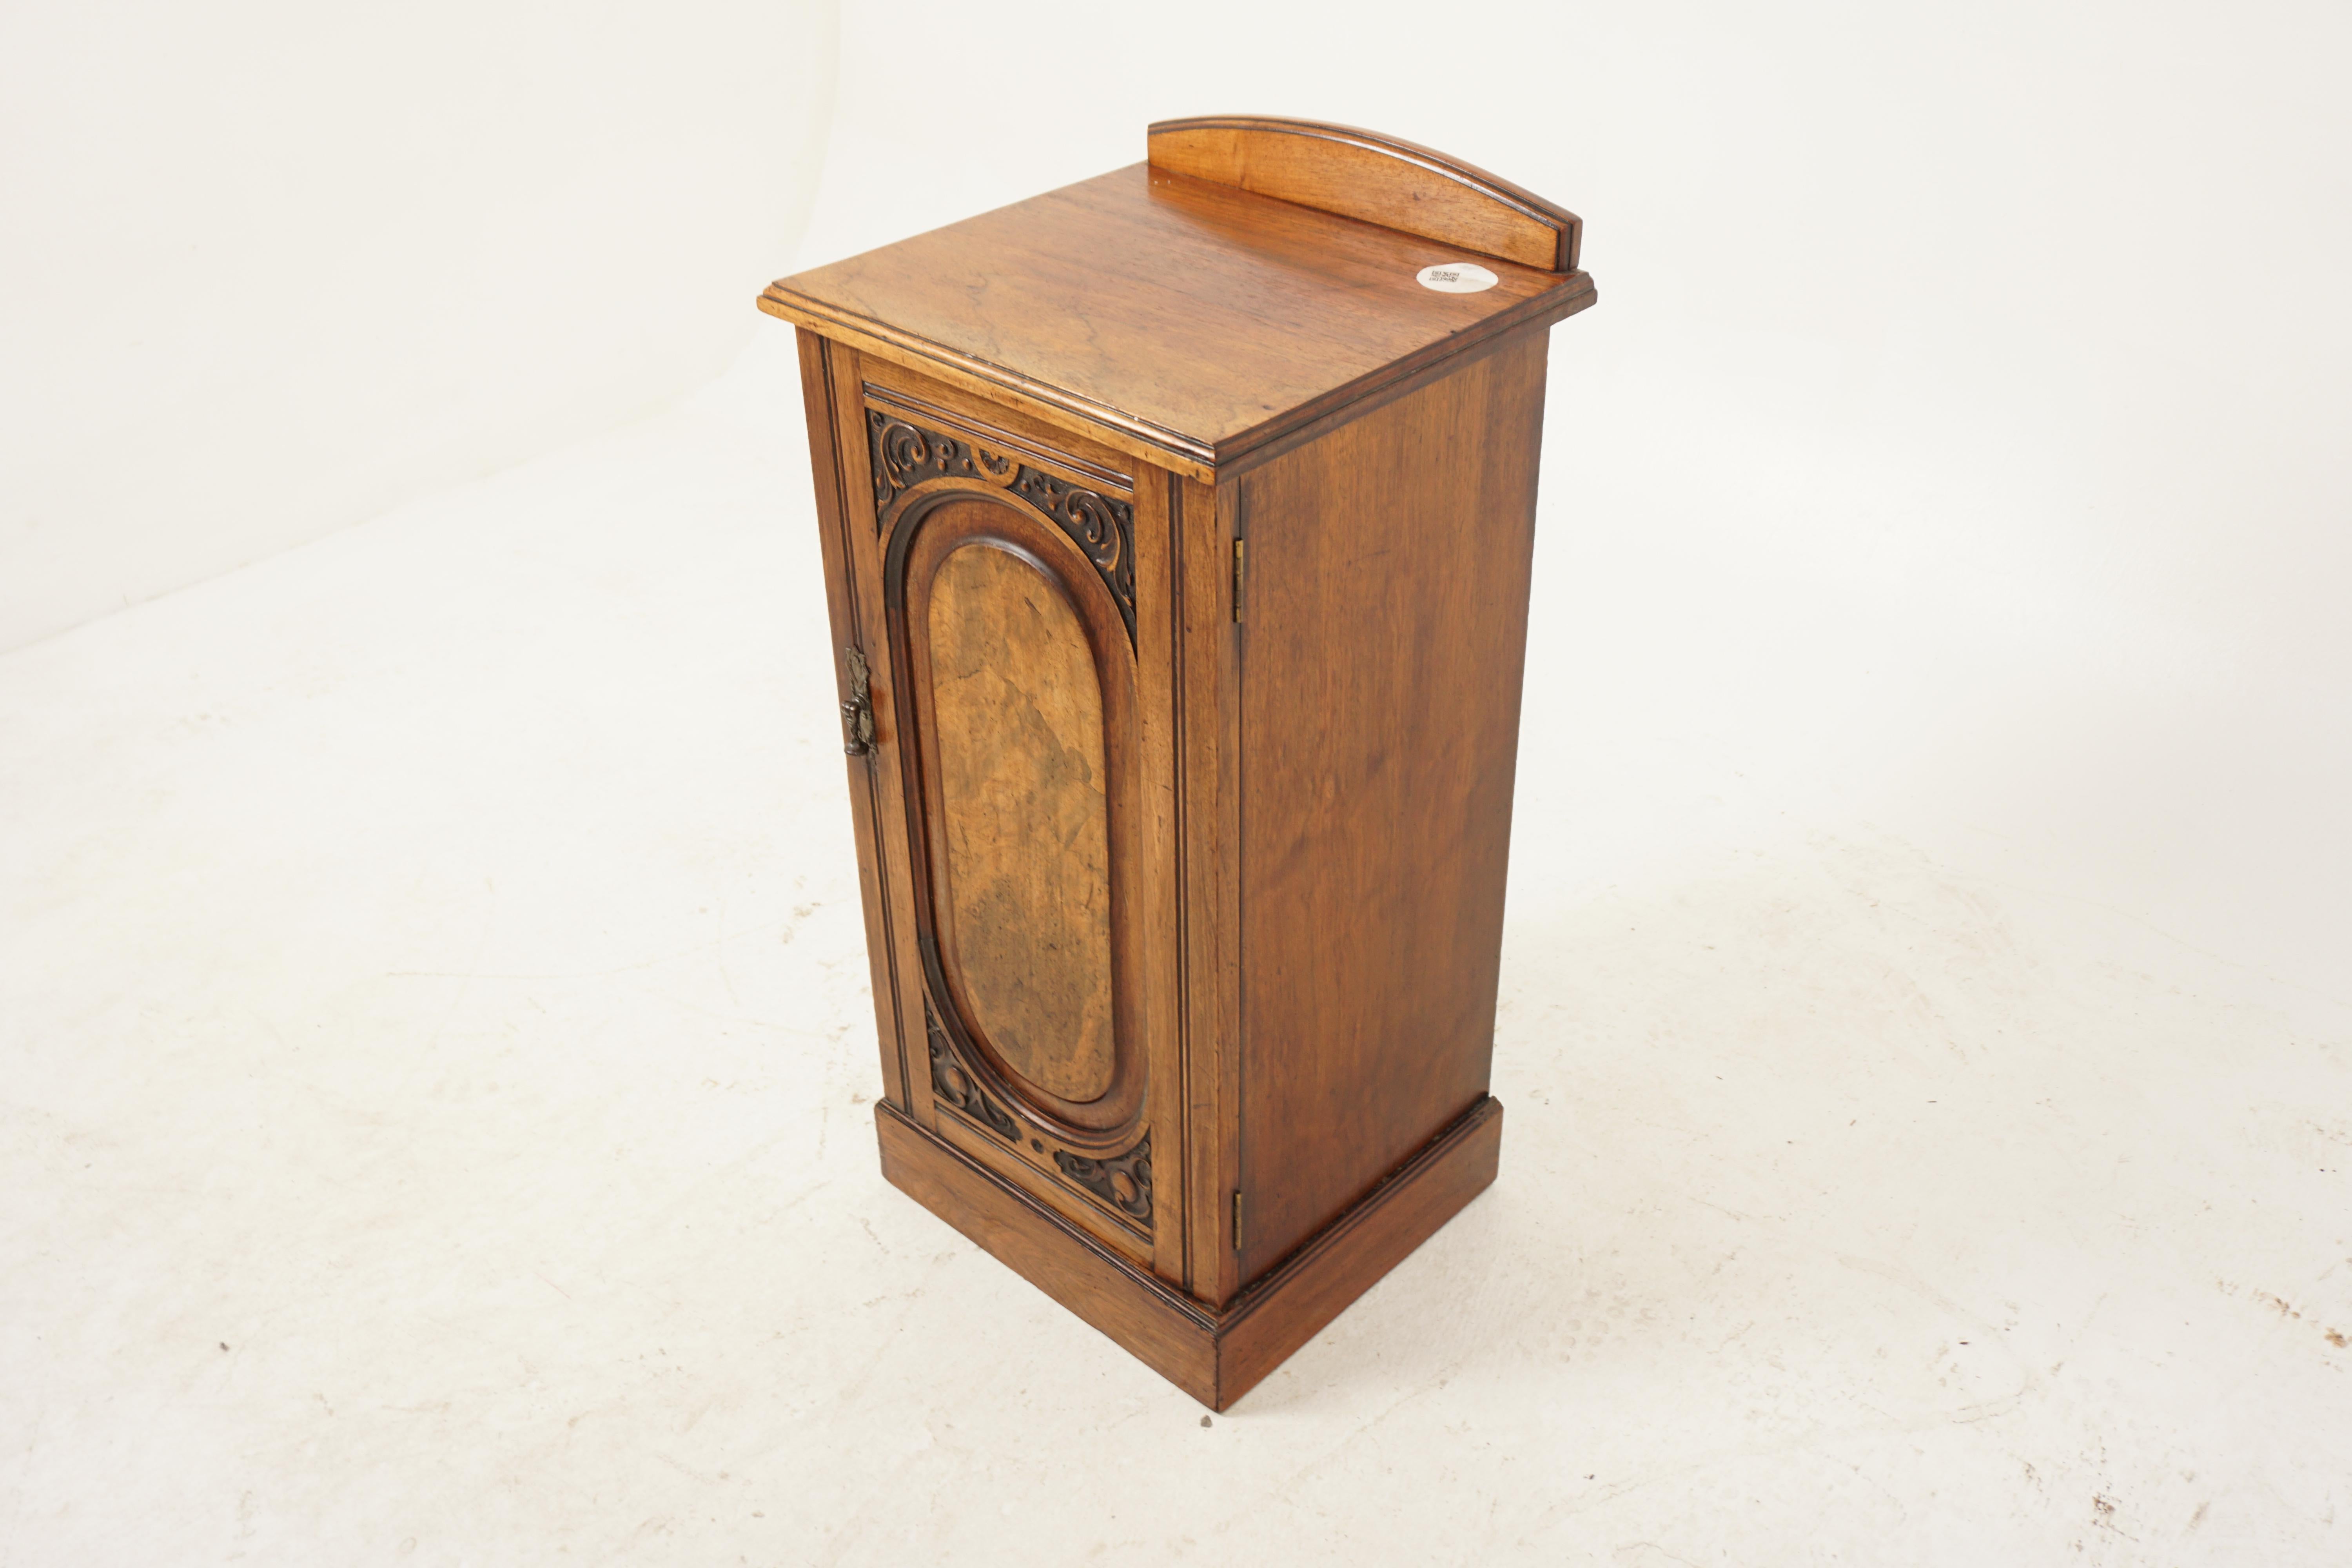 Antique Walnut Nightstand, Victorian Lamp and Bedside Table, Antique Furniture, Scotland 1880, H1066

Scotland 1880
Solid walnut veneer
Original finish
Rectangular moulded top with pediment on the back
Carved single door with paneled